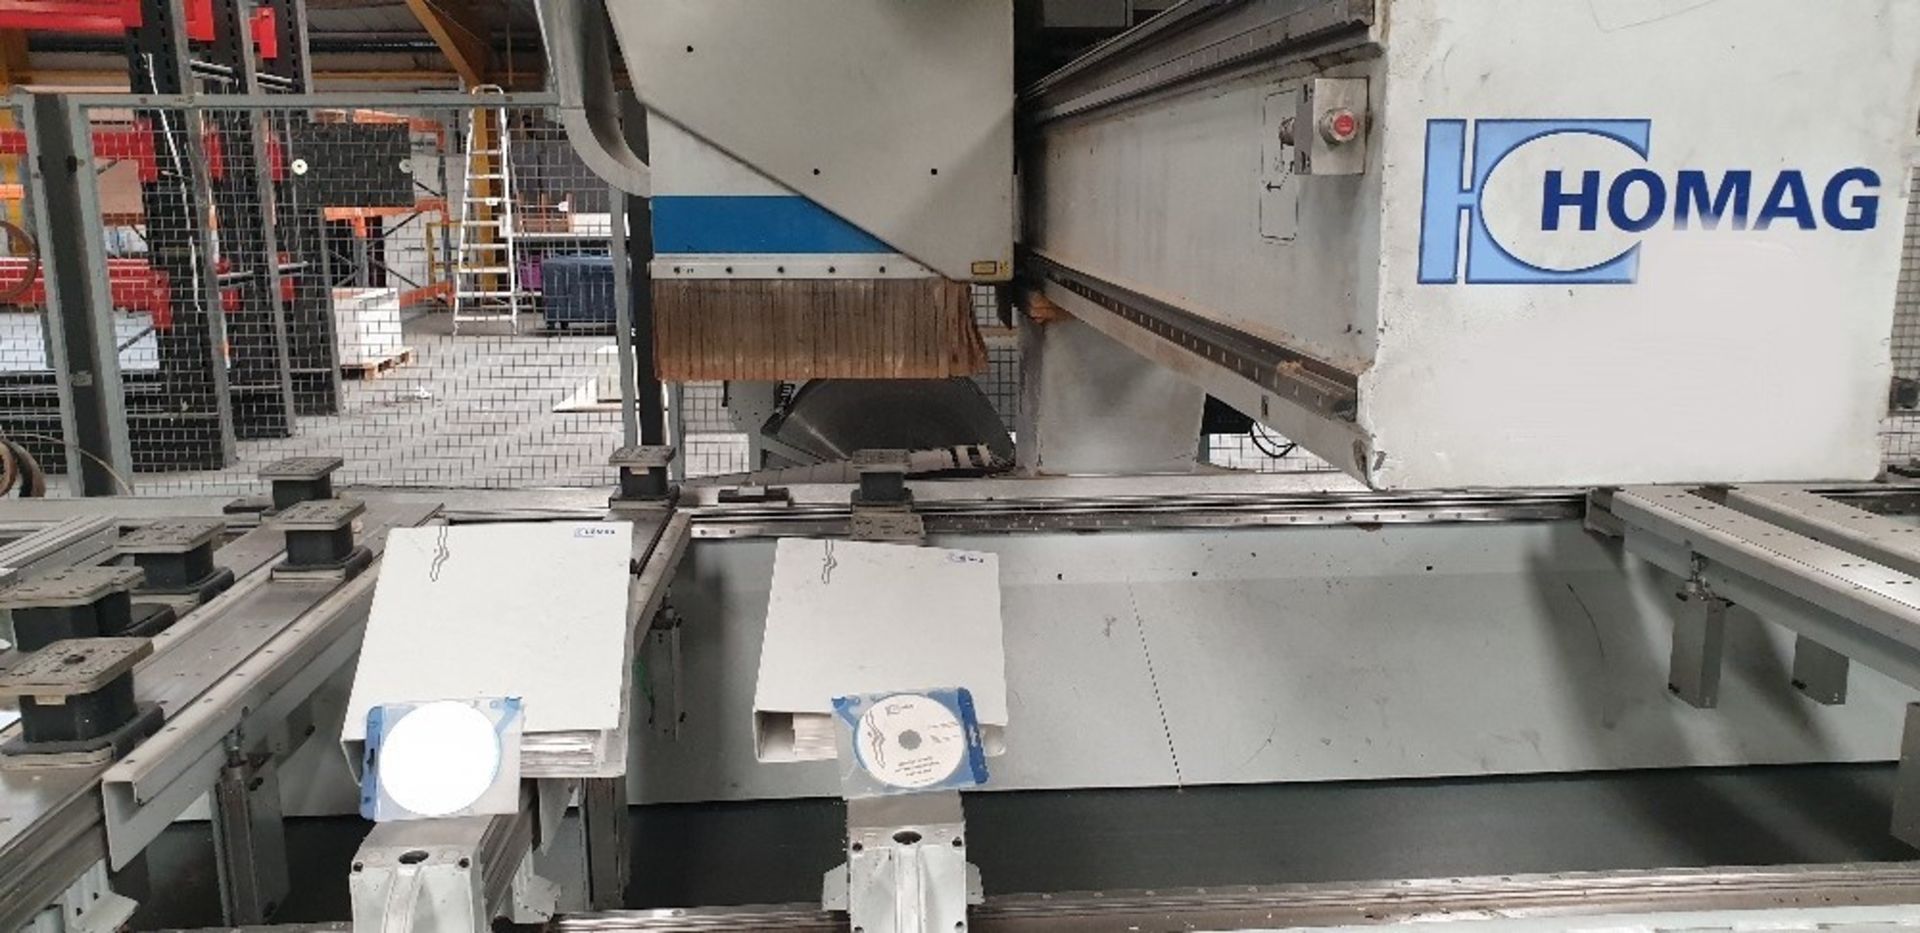 Homag Optimat BAZ 322/40/K CNC machining centre. Serial No. 0-201-15-2884. Year of Manufacture 2004. - Image 2 of 9